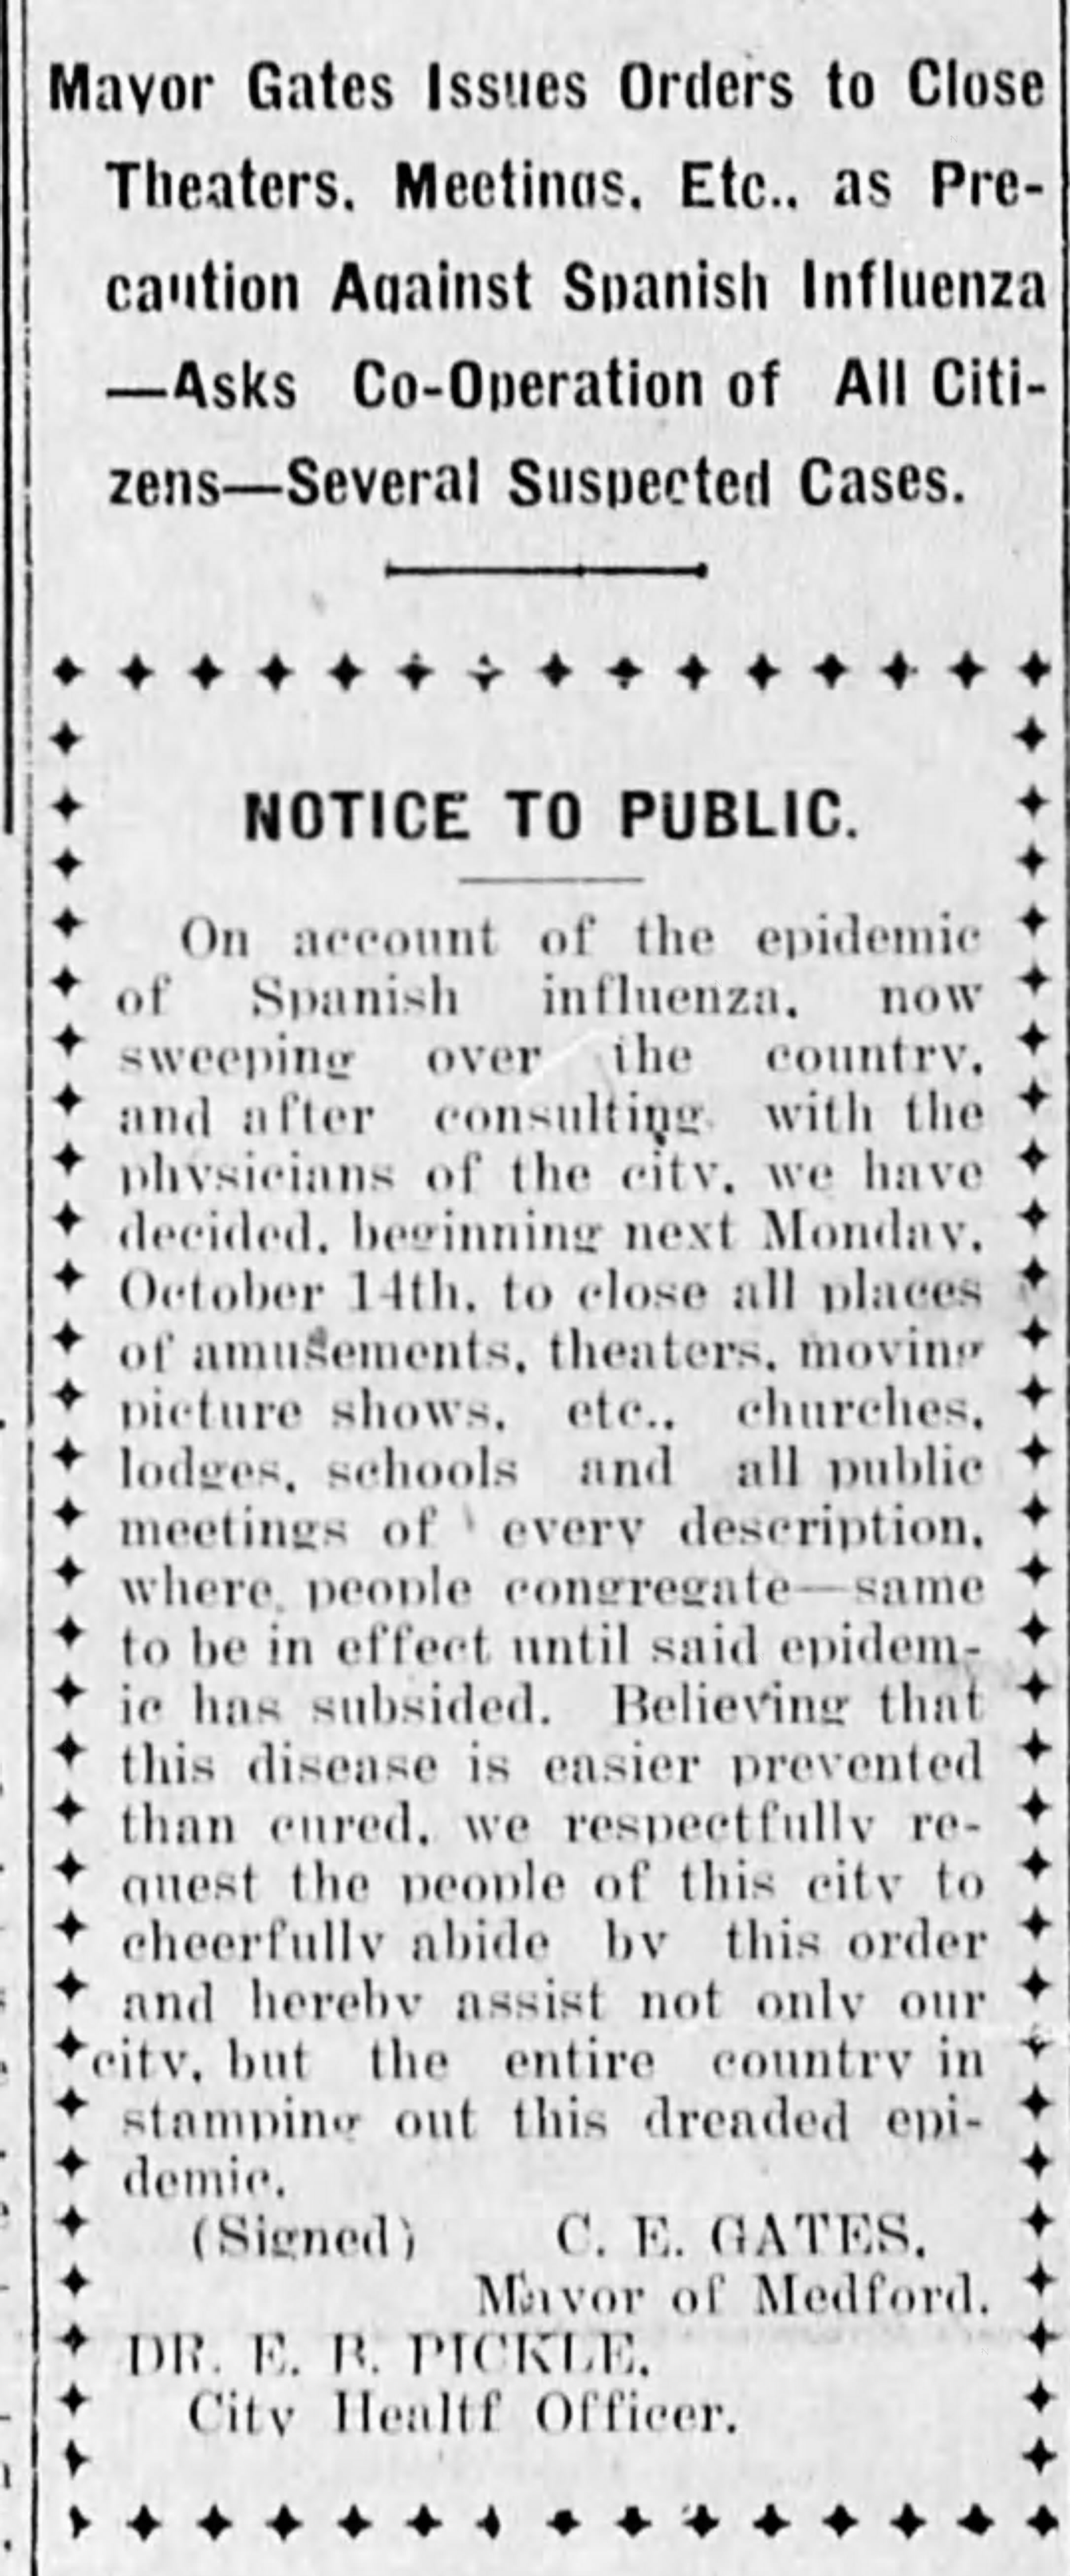 Theaters closed for flu pandemic, 1918